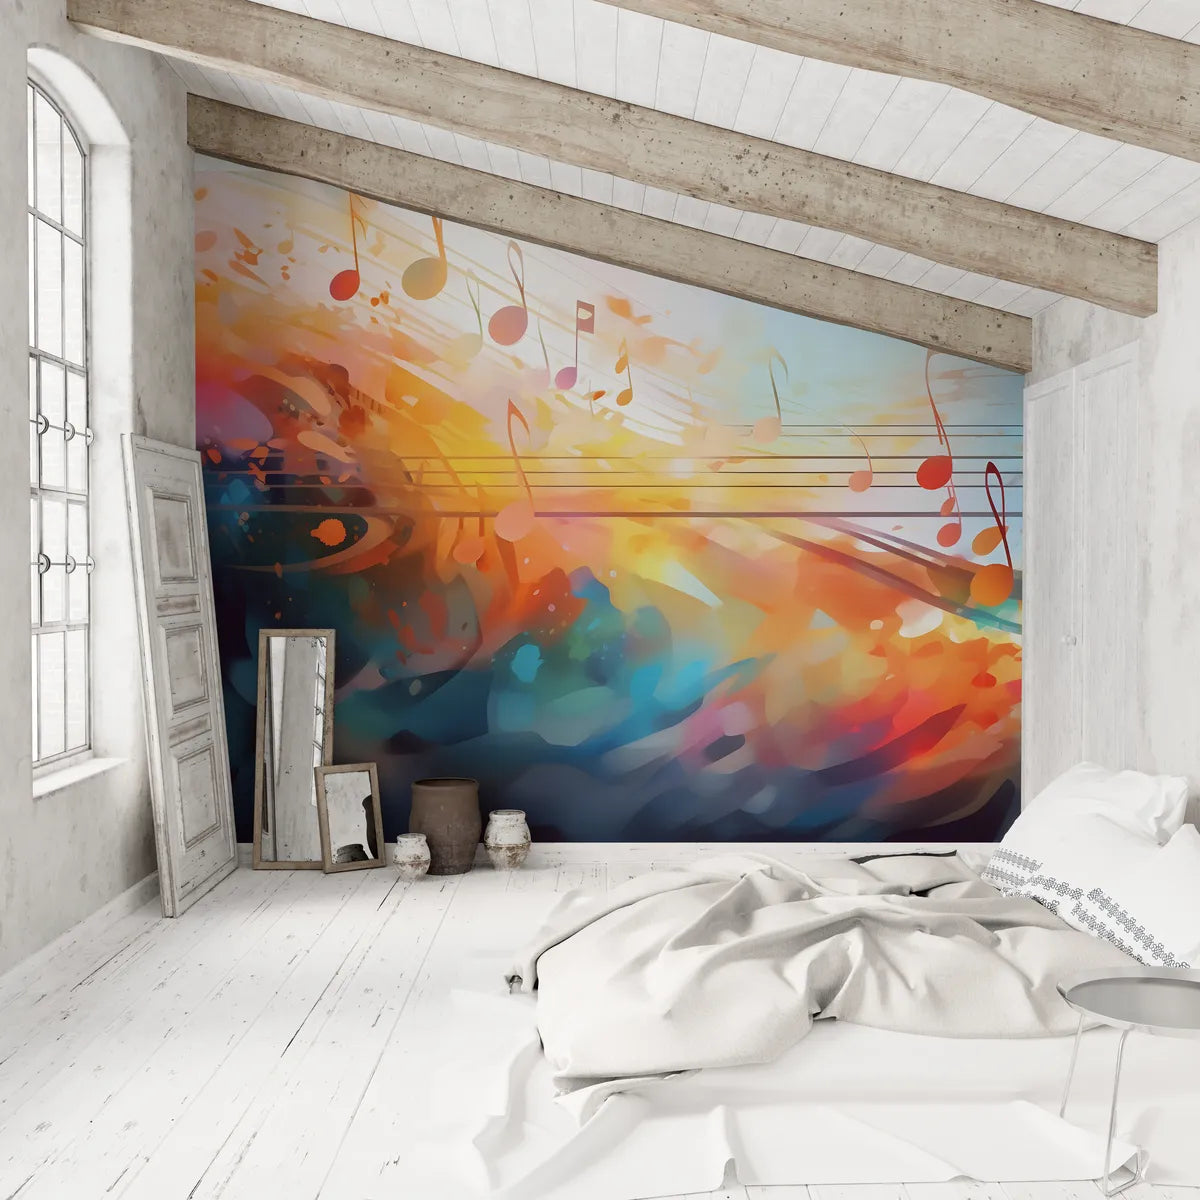 Multicolored abstract music wallpaper